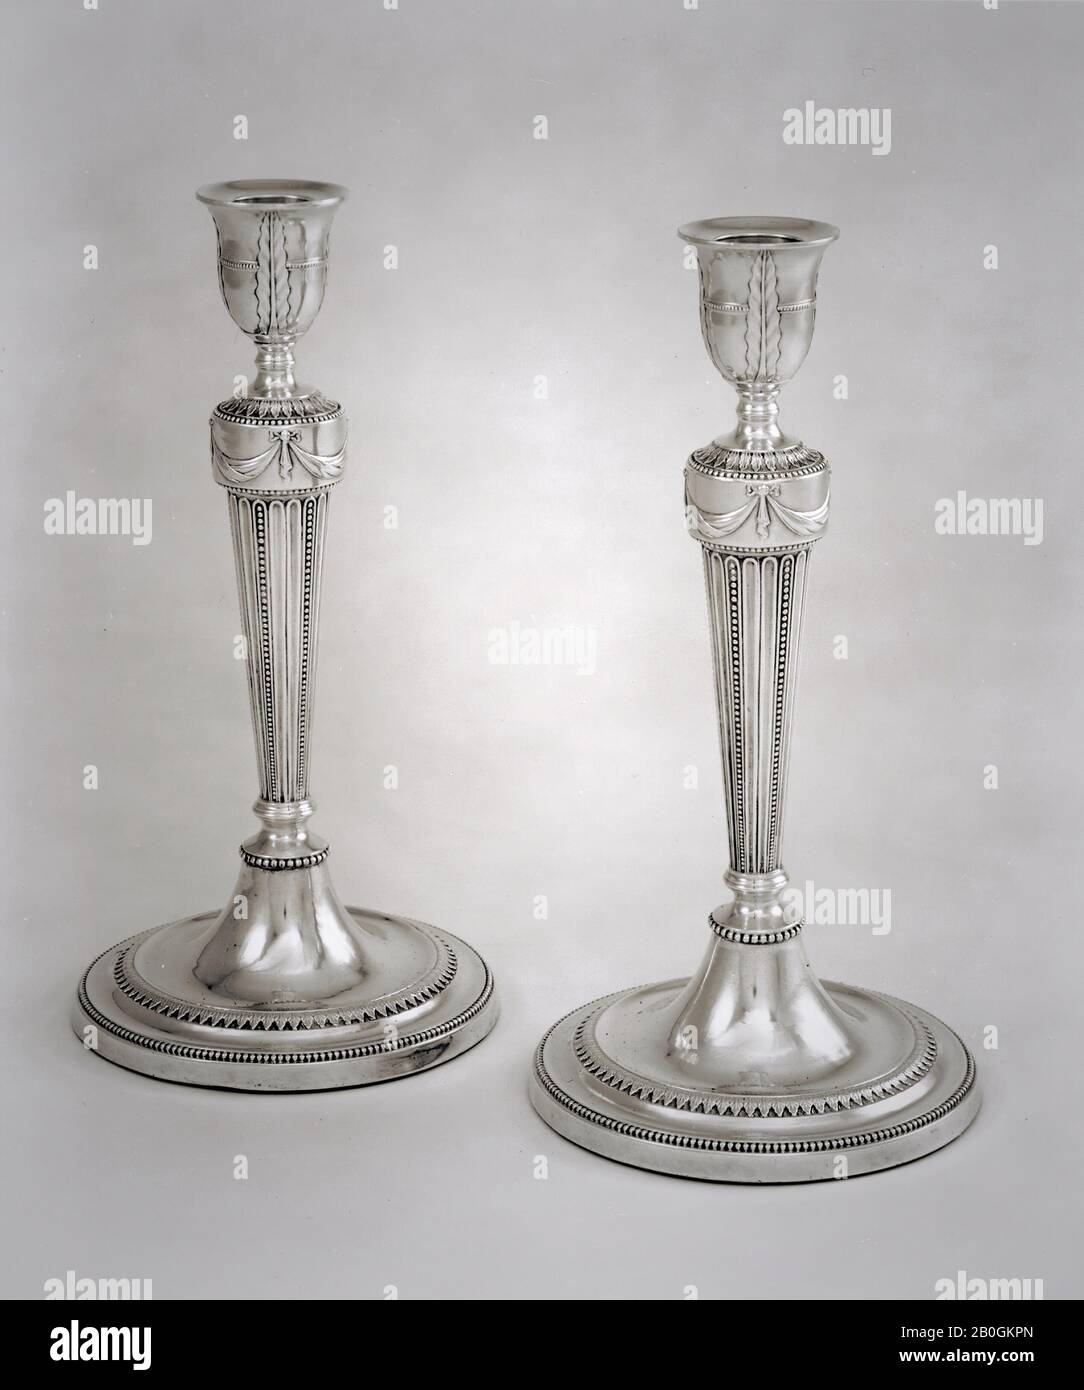 Maker unknown, Pair of Candlesticks, c. 1785/86, Fused silverplate, [1] 10 3/8 x 5 1/4 x 5 1/4 in. (26.4 x 13.3 x 13.3 cm); troy weight: 21.95 toz (682.7 g), loaded Stock Photo